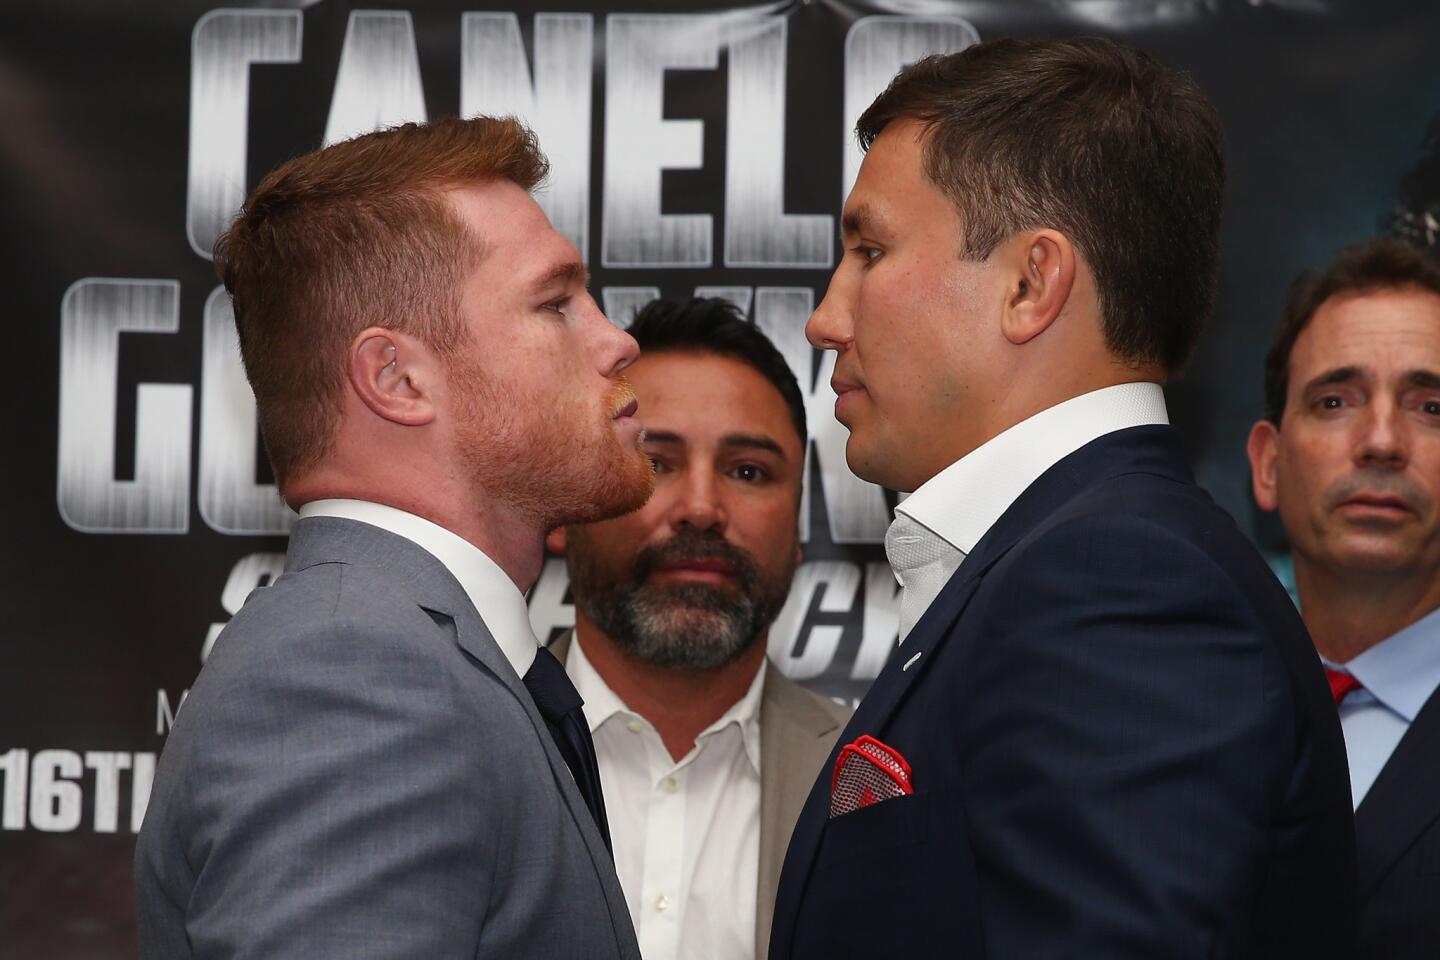 LONDON, ENGLAND - JUNE 19: Canelo Alvarez and Gennady Golovkin go head to head after the Canelo Alvarez vs Gennady Golovkin boxing press conference at the Landmark Hotel on June 19, 2017 in London, England. (Photo by Steve Bardens/Getty Images) ** OUTS - ELSENT, FPG, CM - OUTS * NM, PH, VA if sourced by CT, LA or MoD **